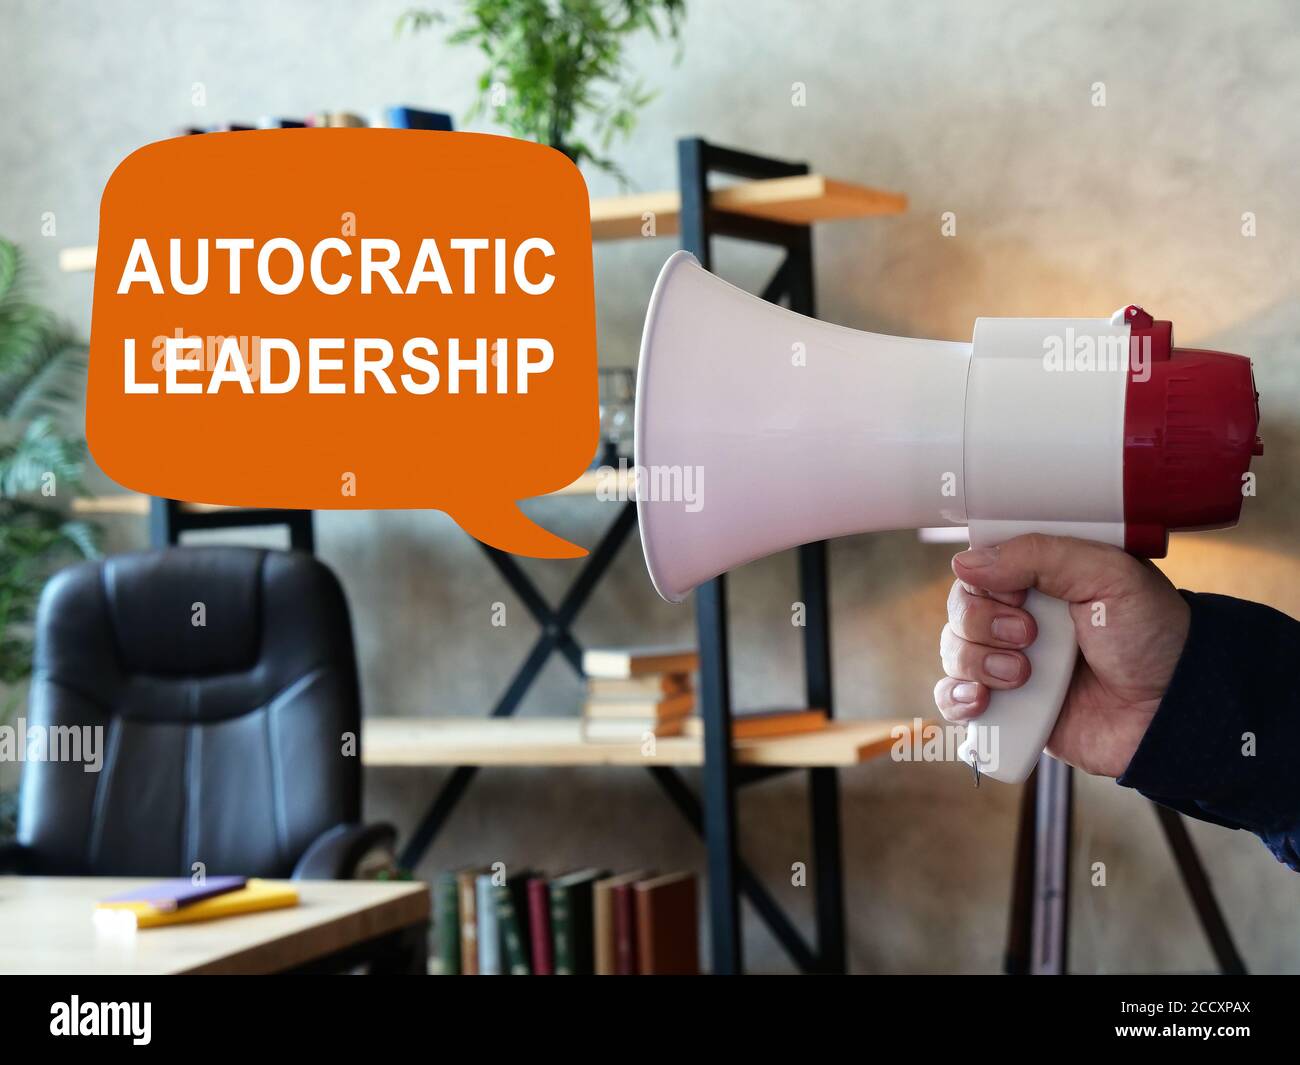 Autocratic leadership concept. Loudspeaker in hand and sign. Stock Photo